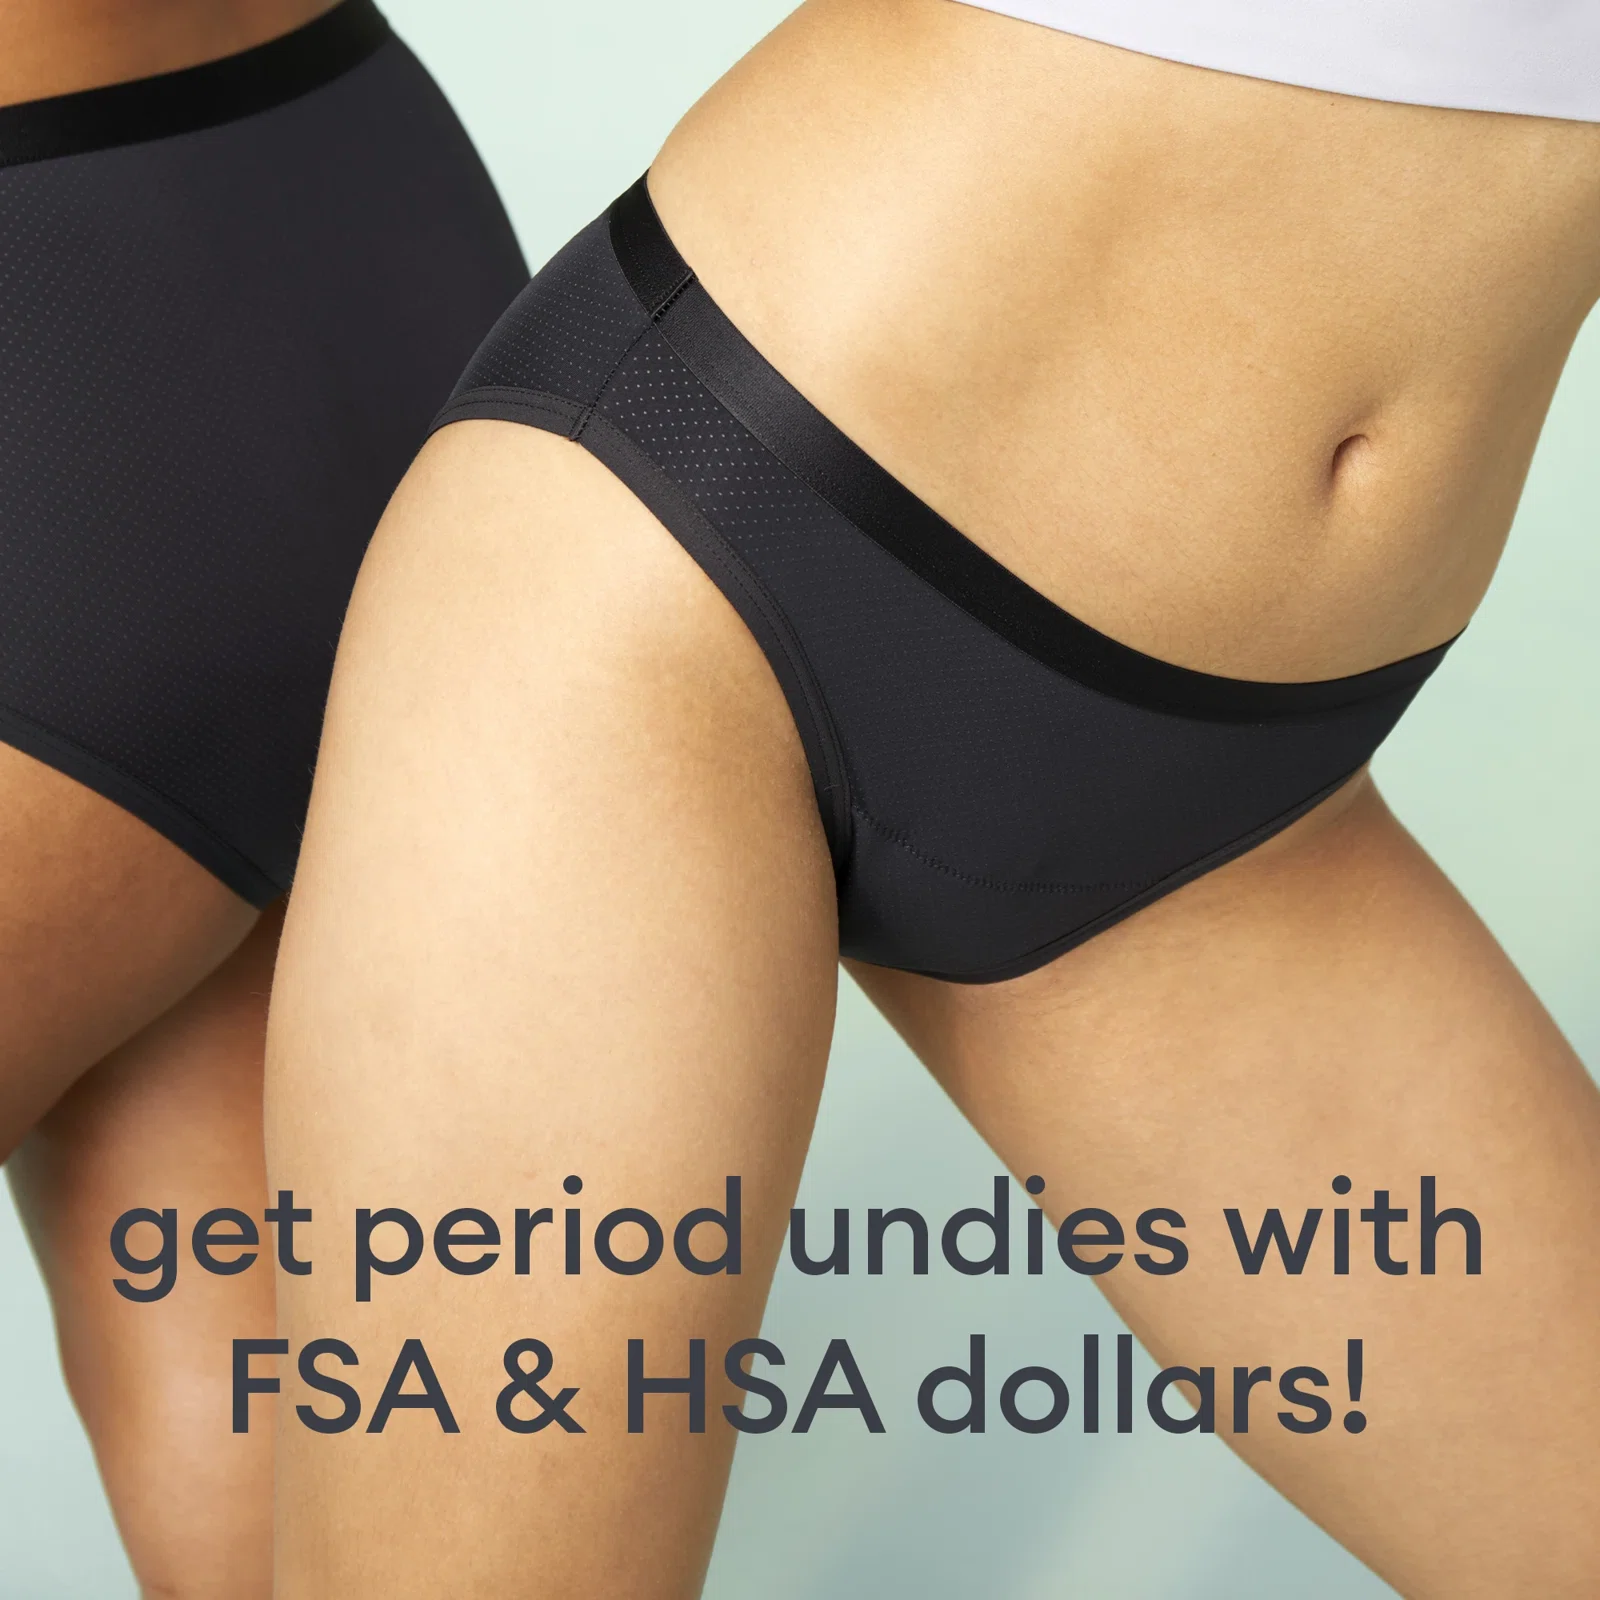 Thinx: How to redeem your FSA/HSA